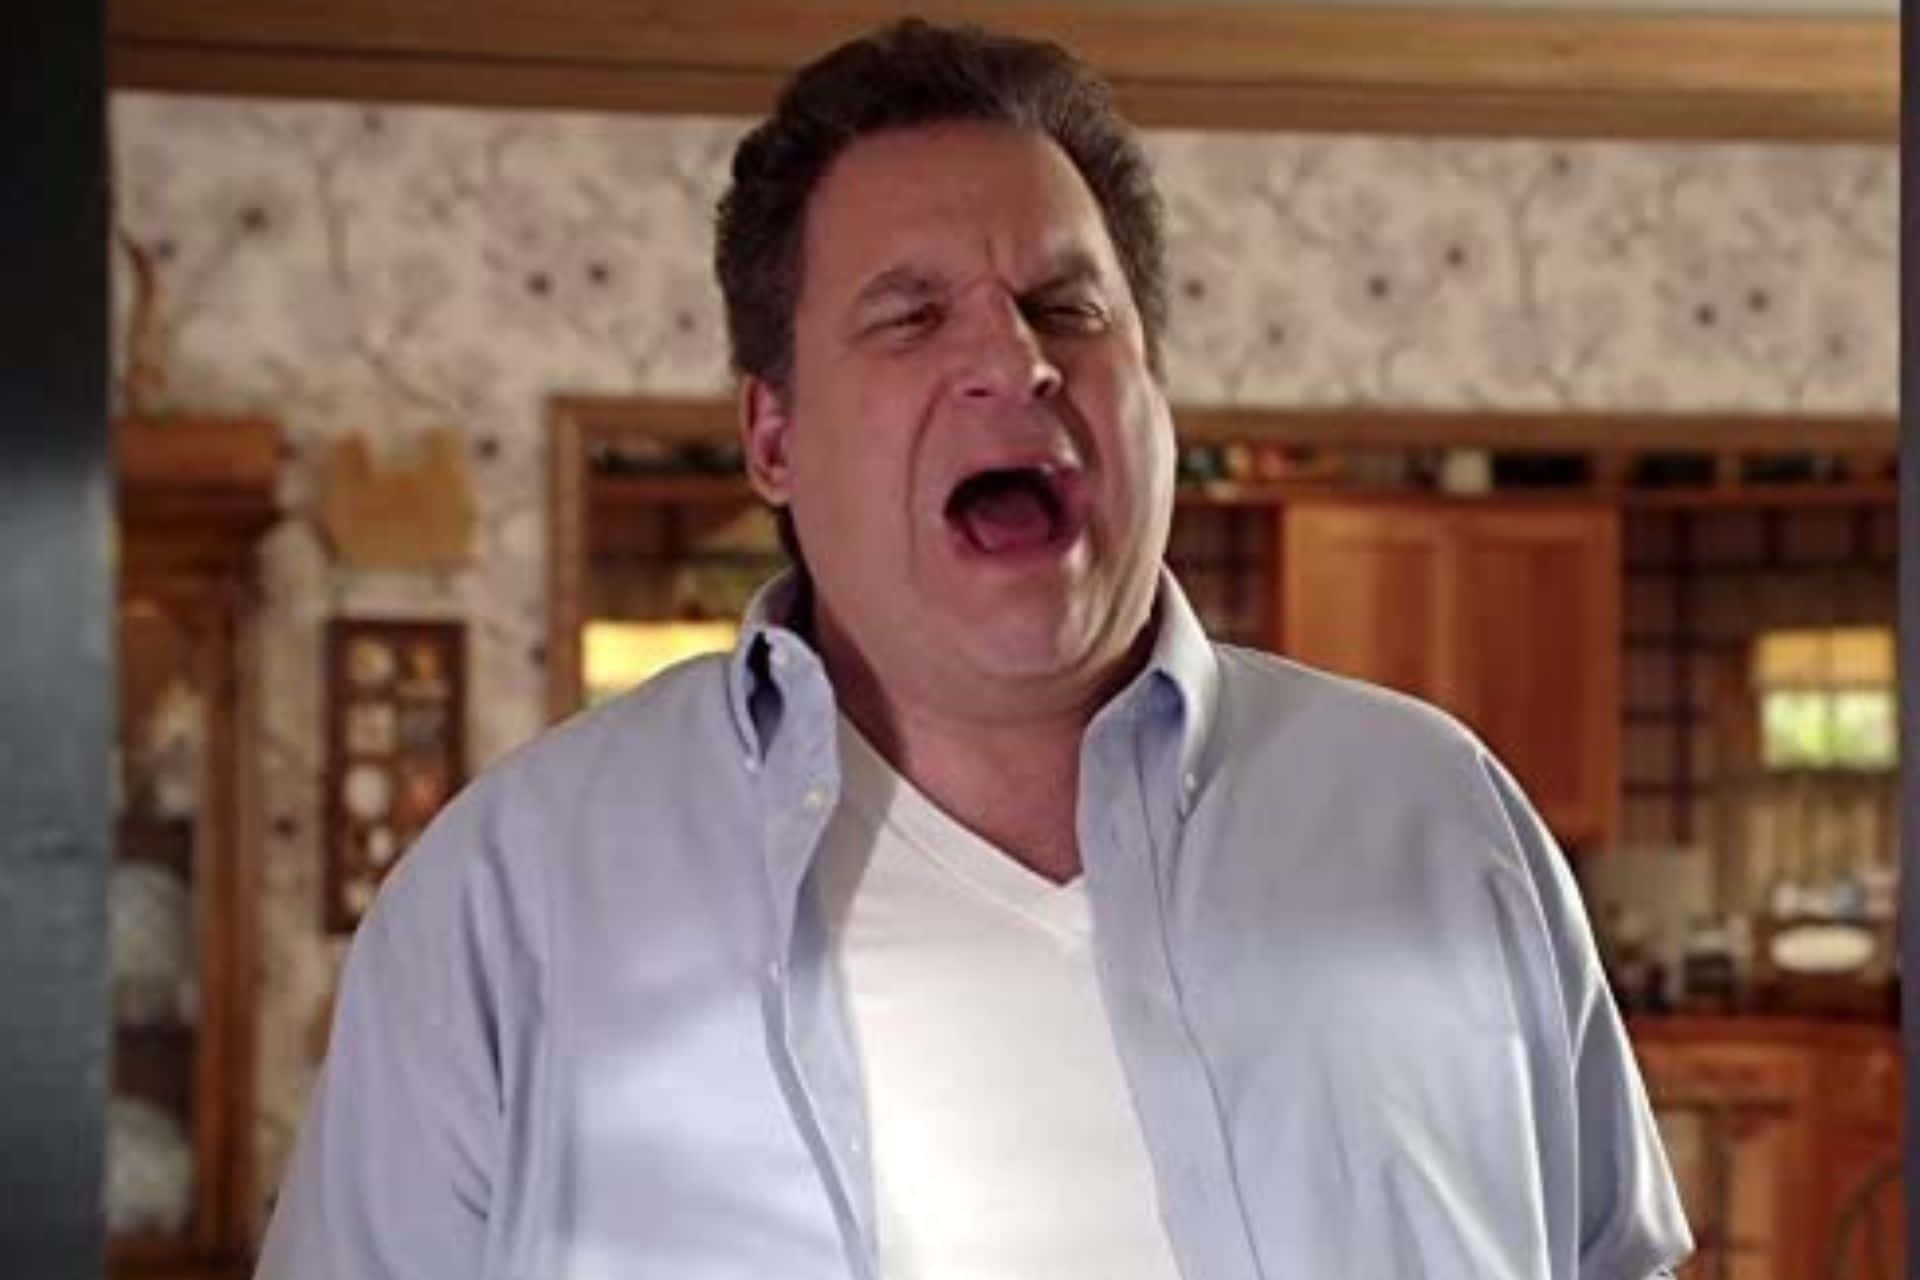 Jeffgarlin Is An American Comedian, Actor, And Voice Actor. He Is Best Known For His Role As Jeff Greene On The Hbo Sitcom Curb Your Enthusiasm. Fondo de pantalla